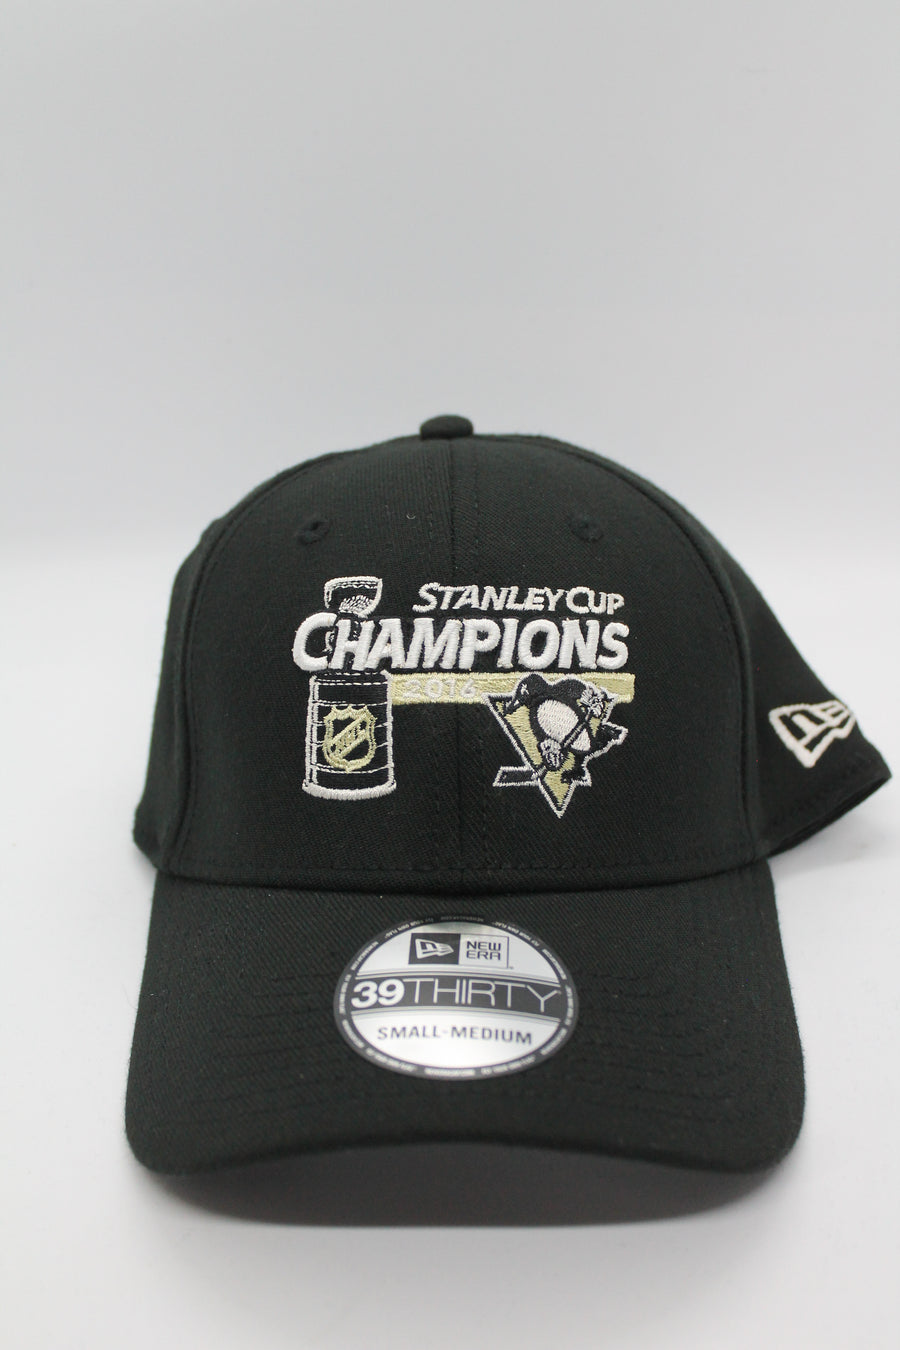 Pittsburgh Penguins Black White 2016 Stanley Cup Champions '47 MVP Hat Cap